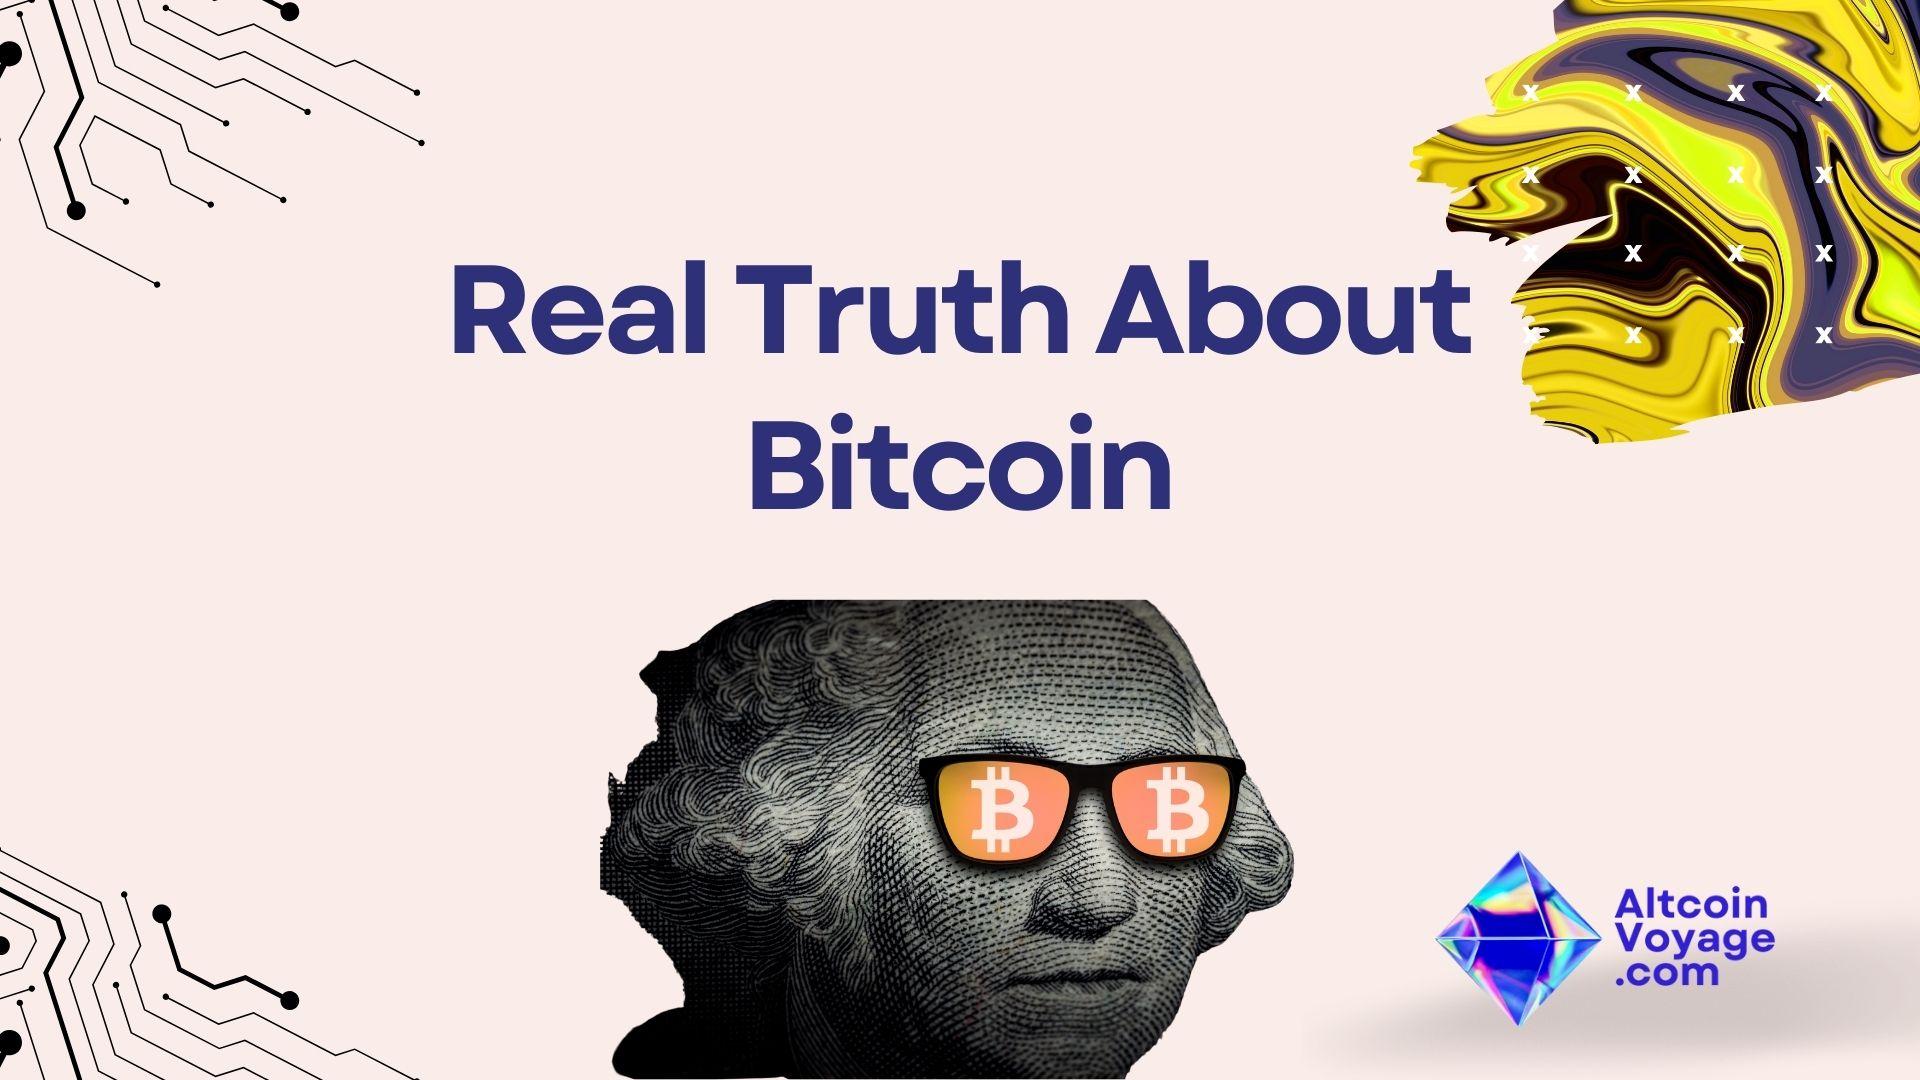 Real Truth About Bitcoin